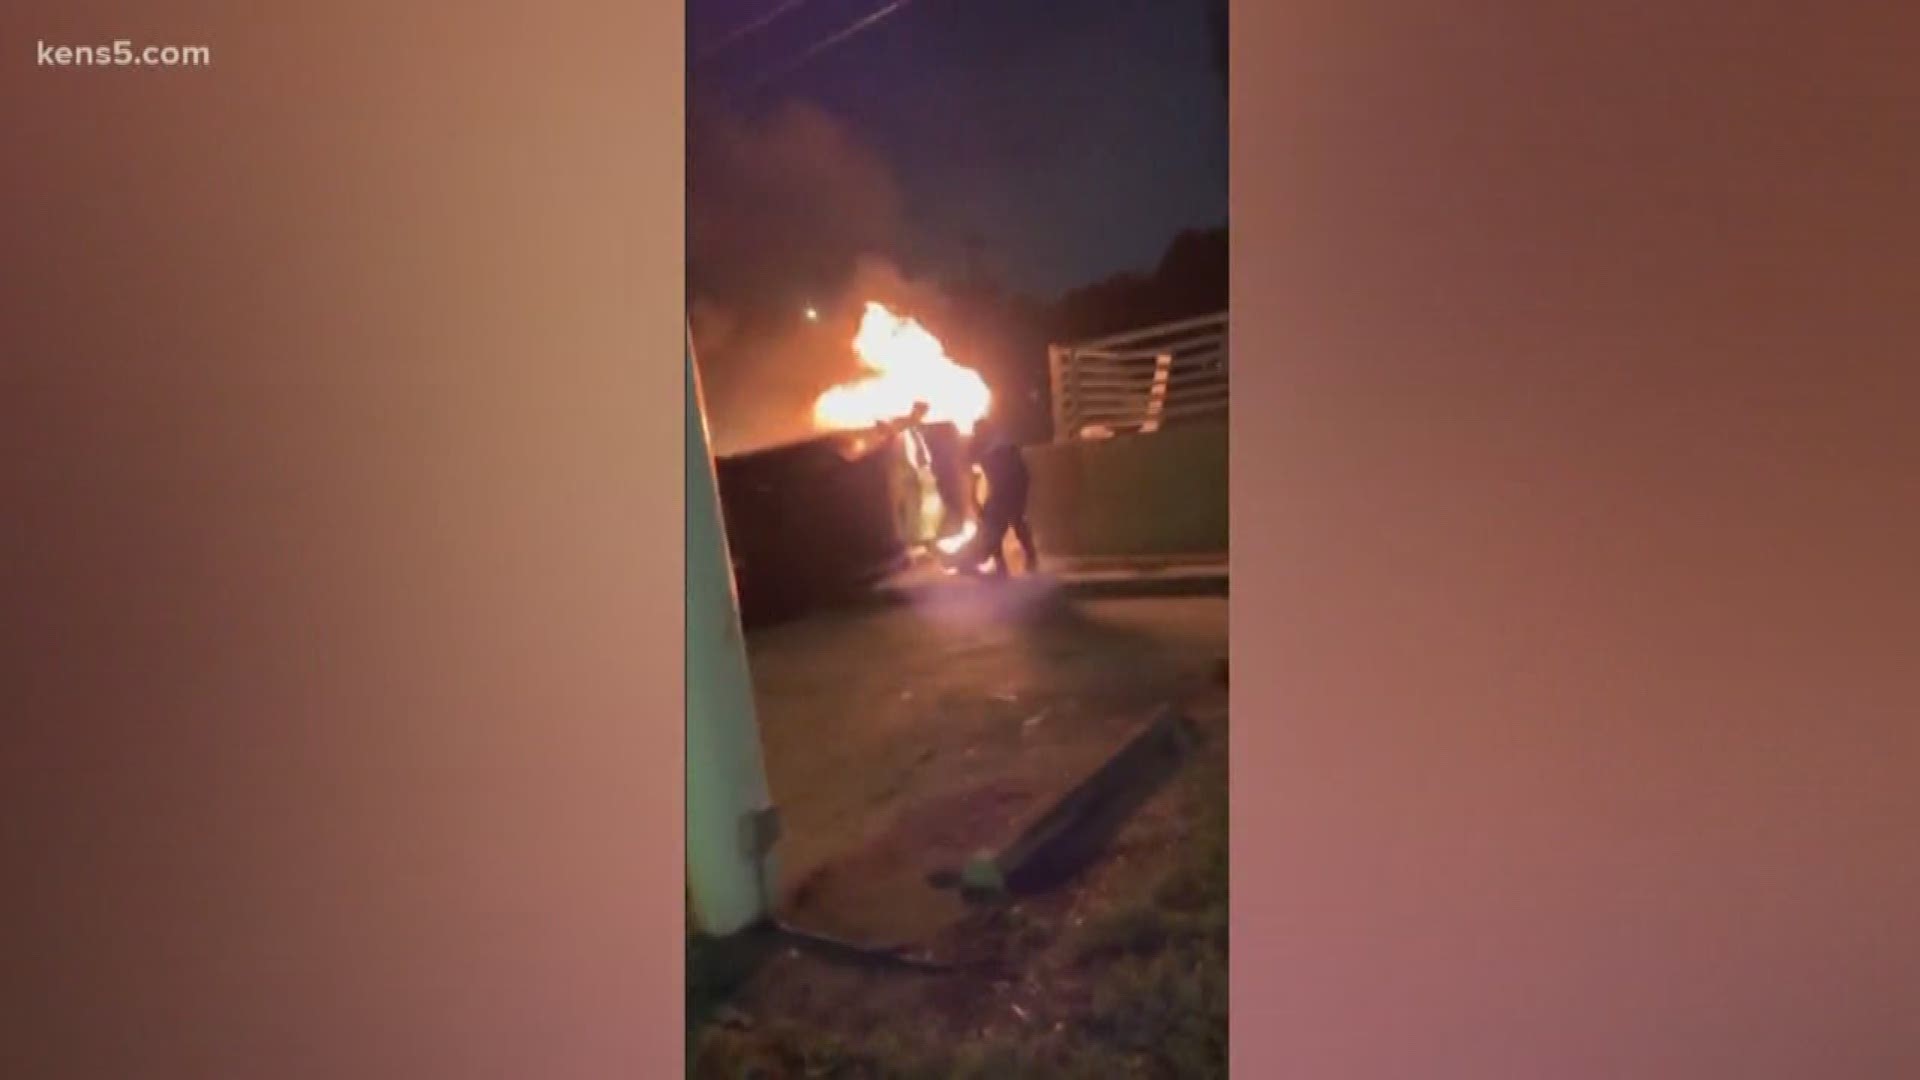 An off-duty St. Mary's University police officer pulled a woman from her car moments before it became completely engulfed in flames. A witness at the scene shared captivating video of the heroic save.